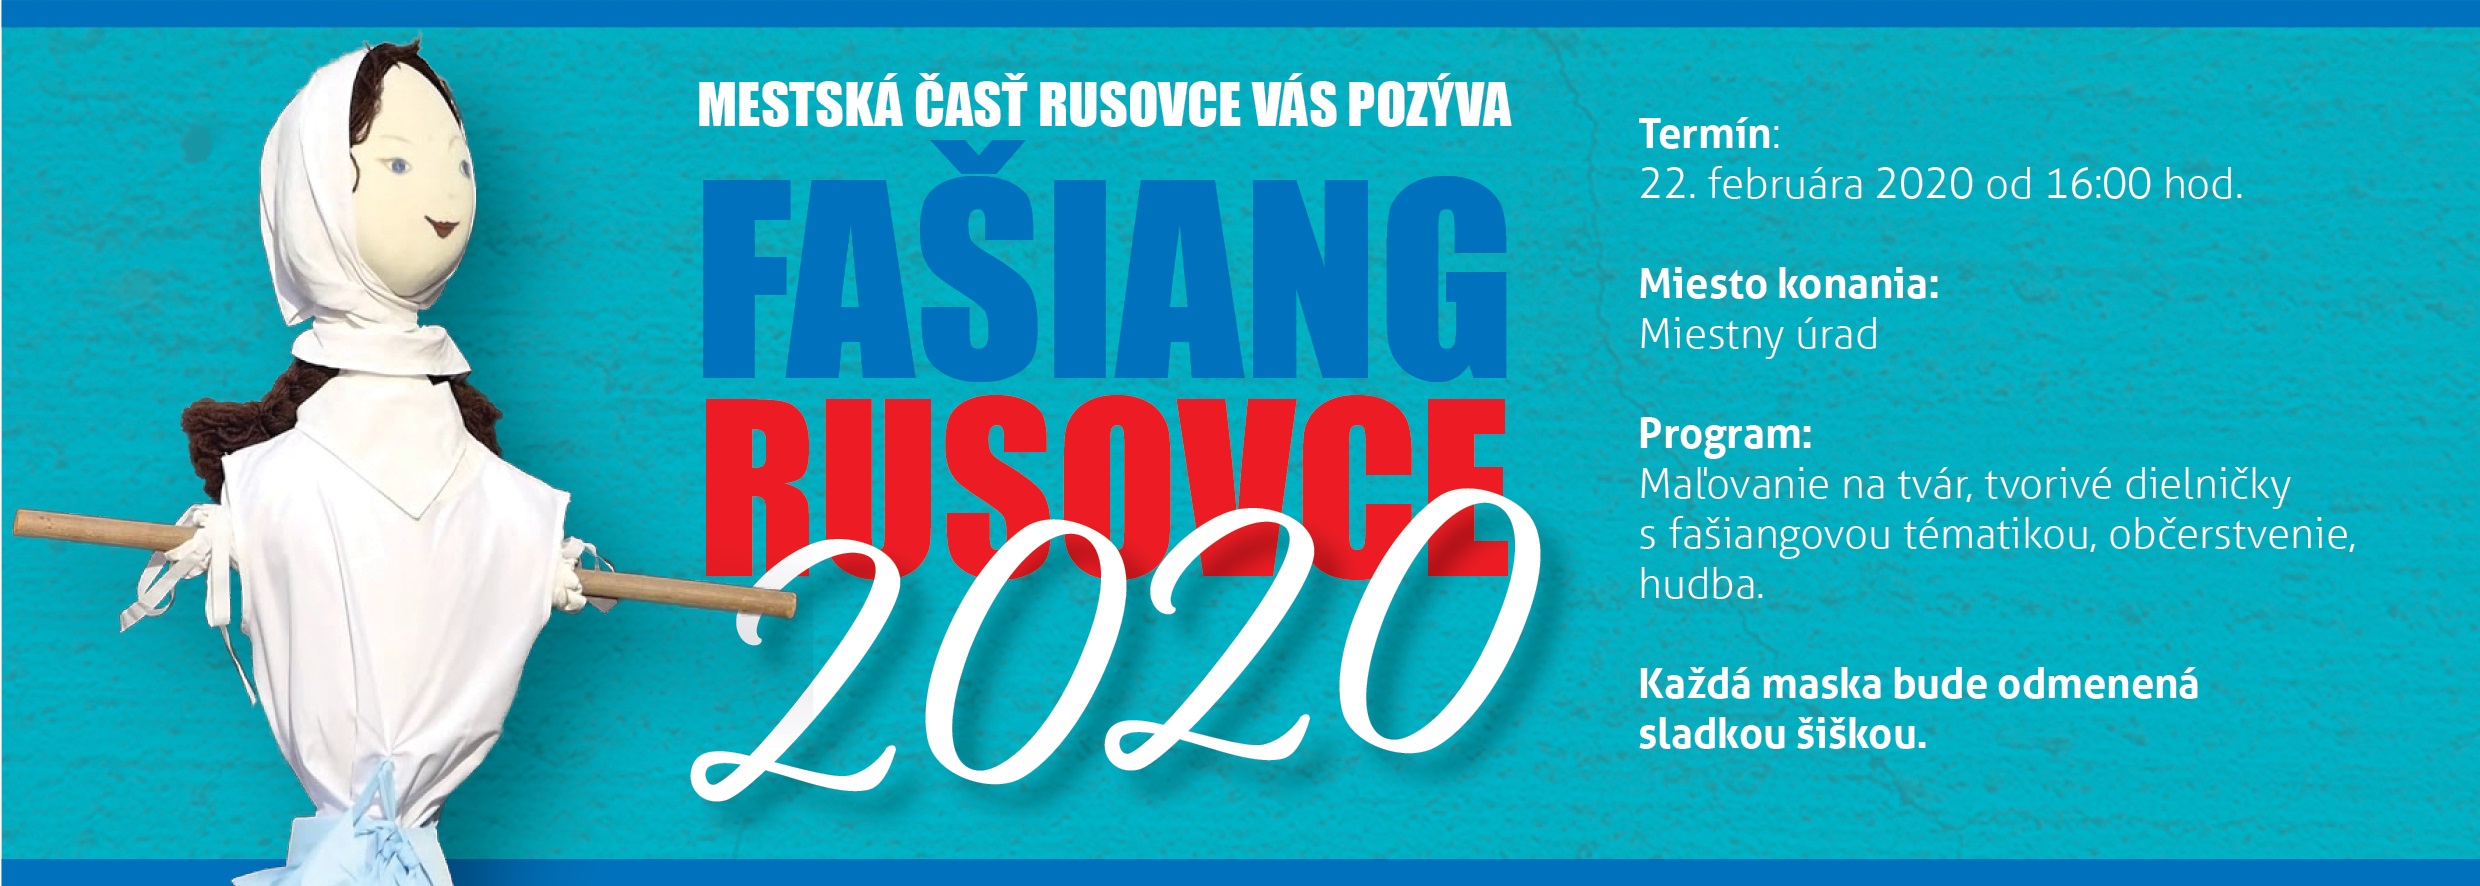 Faiang Rusovce 2020